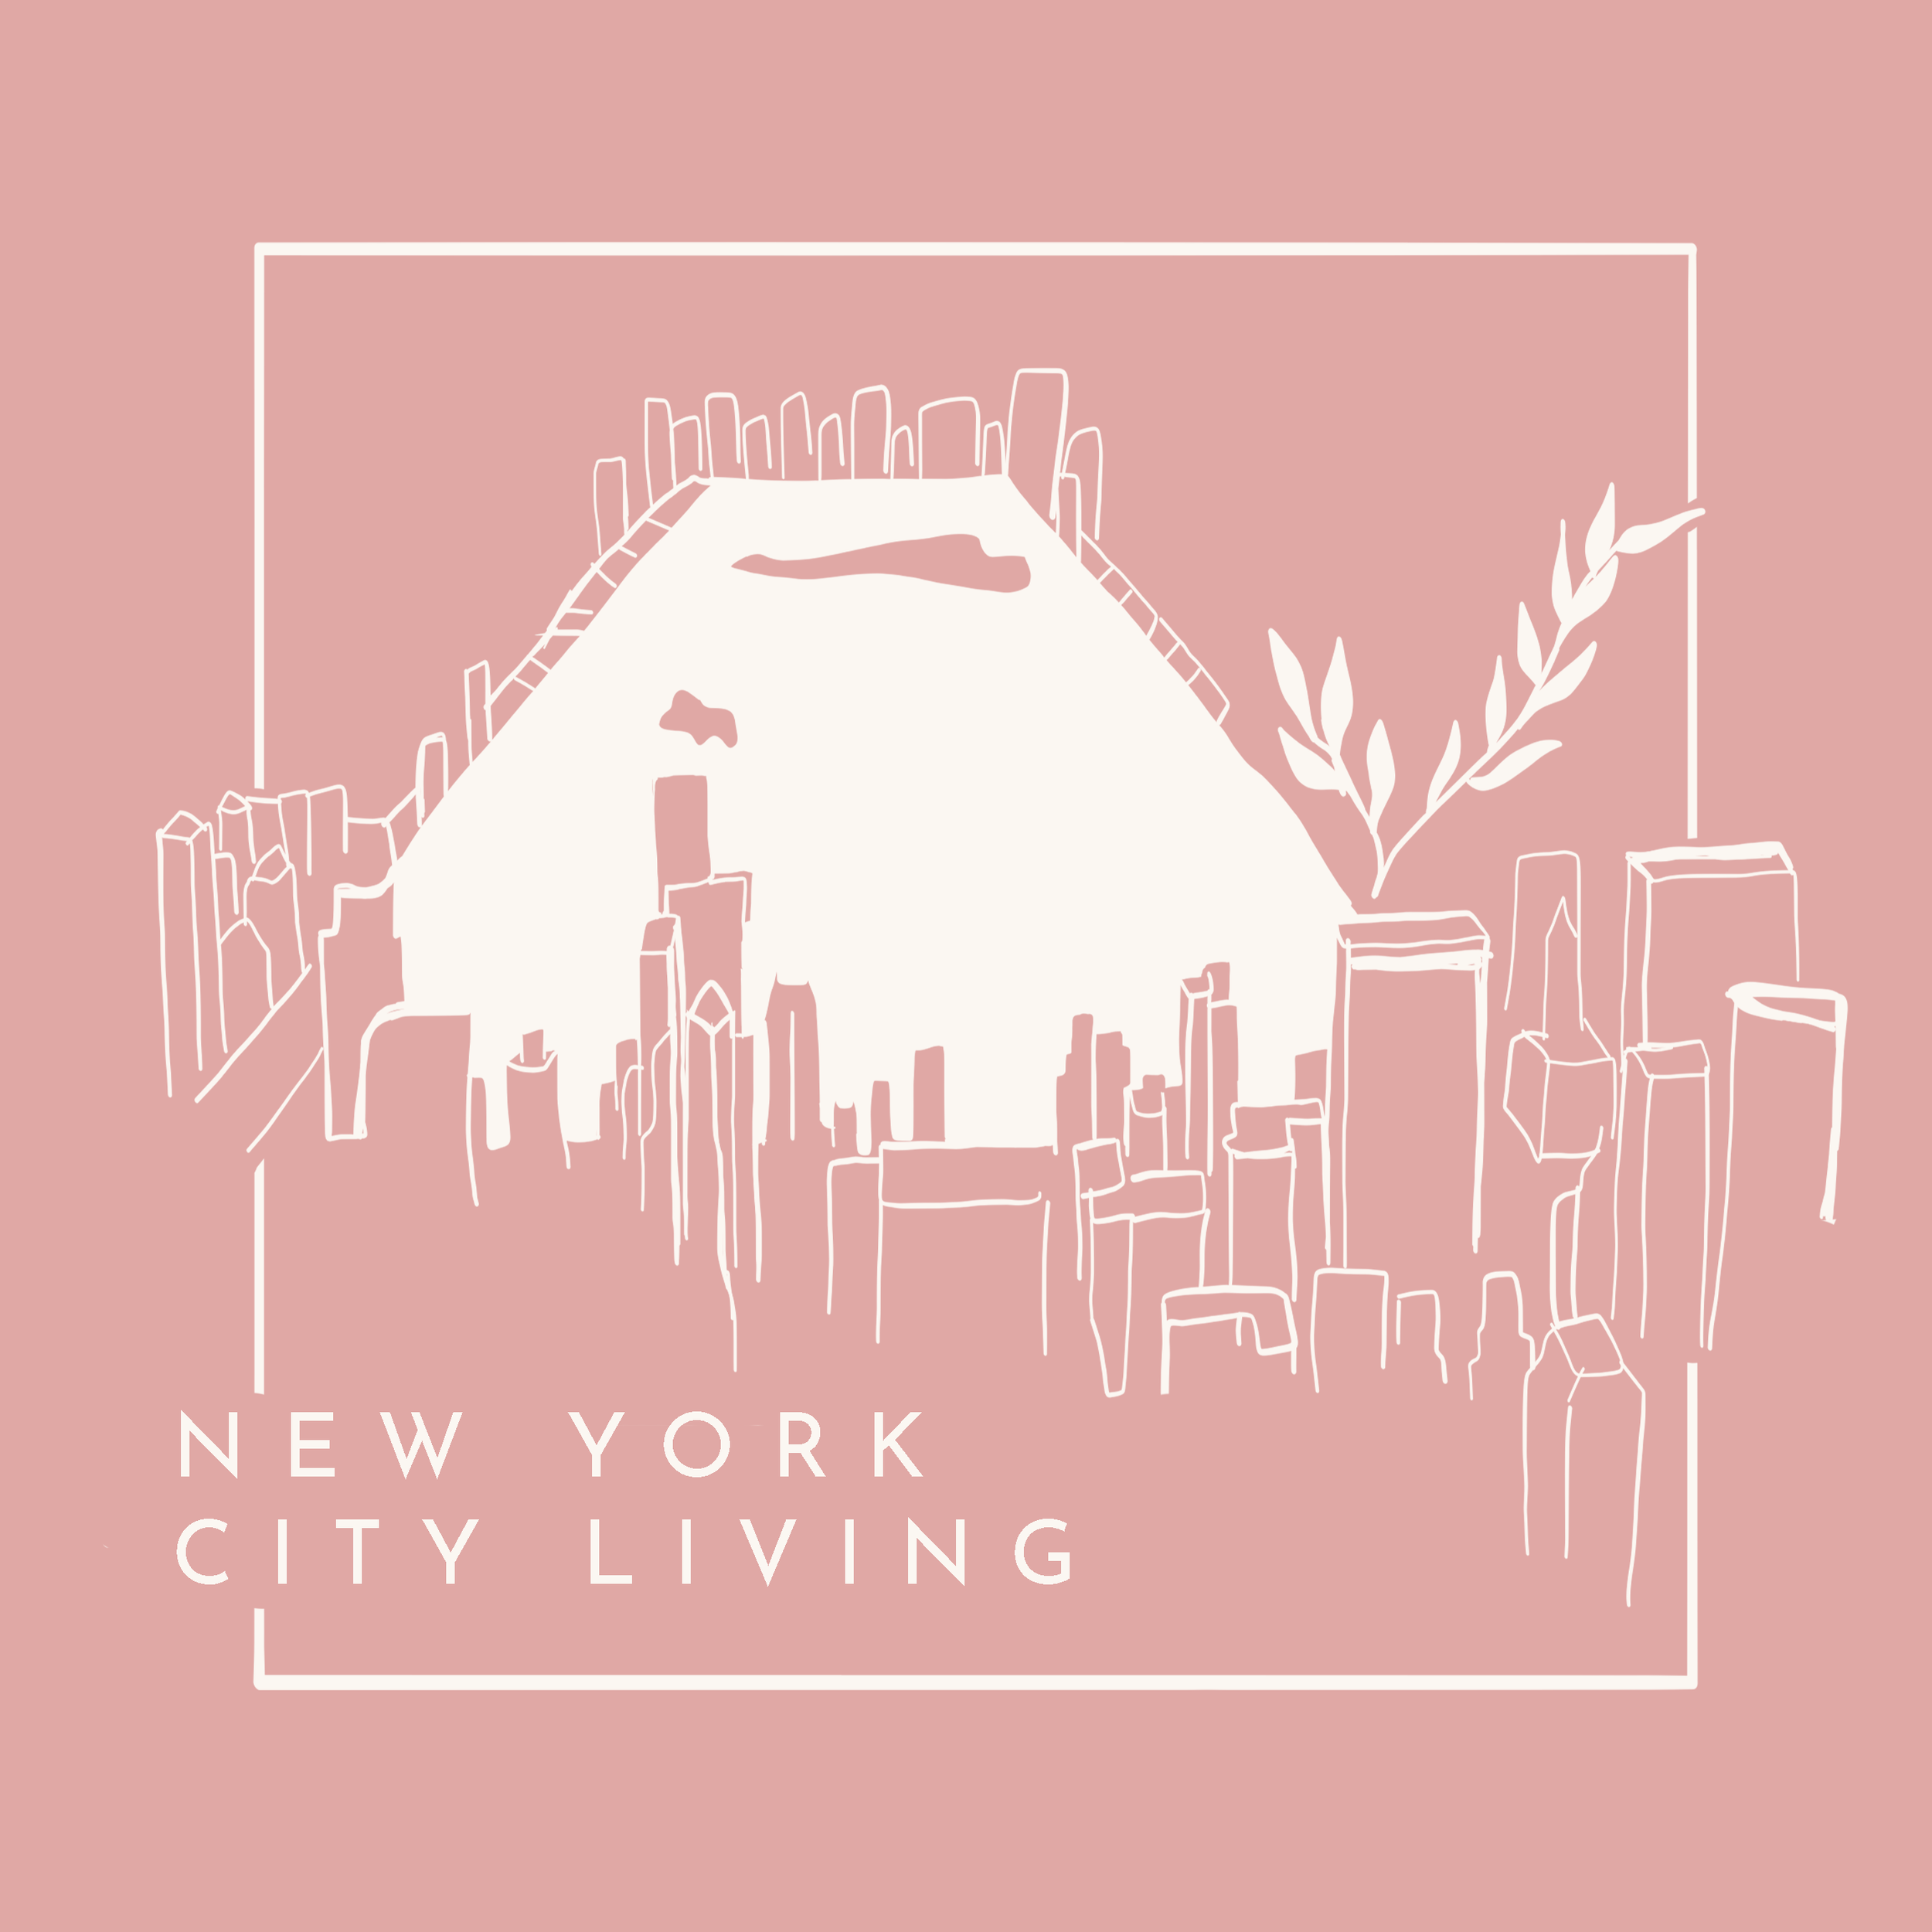 I can't believe we live in New York City, but we do! We live on the Upper West Side and I'm always keeping an eye out for good thrift stores and coffee shops while walking along the Hudson! 